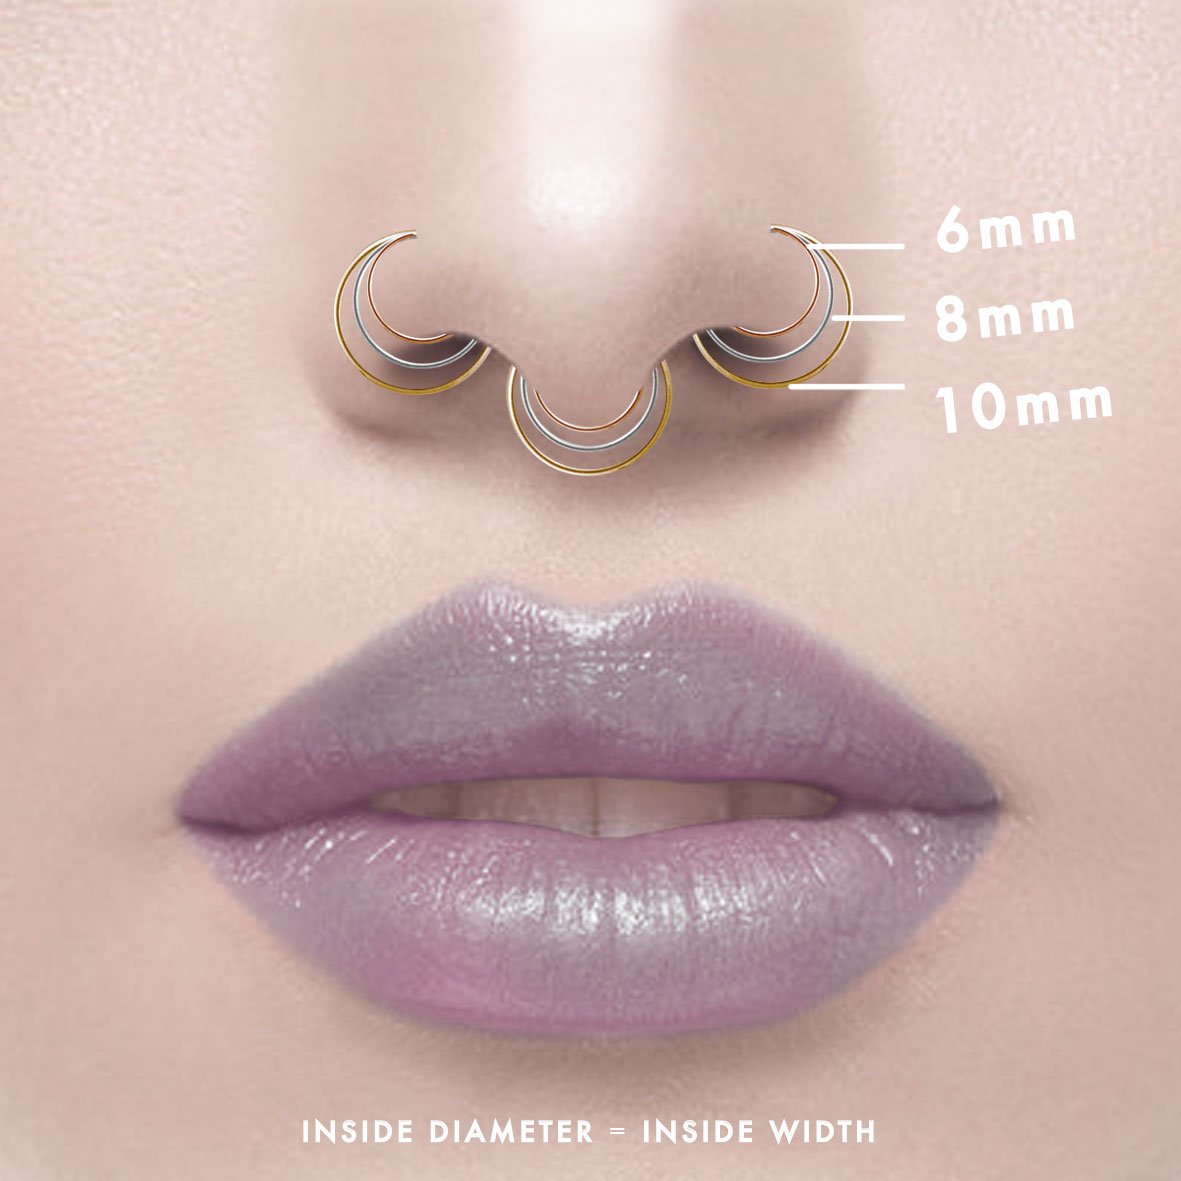 Nose Hoop Size Chart